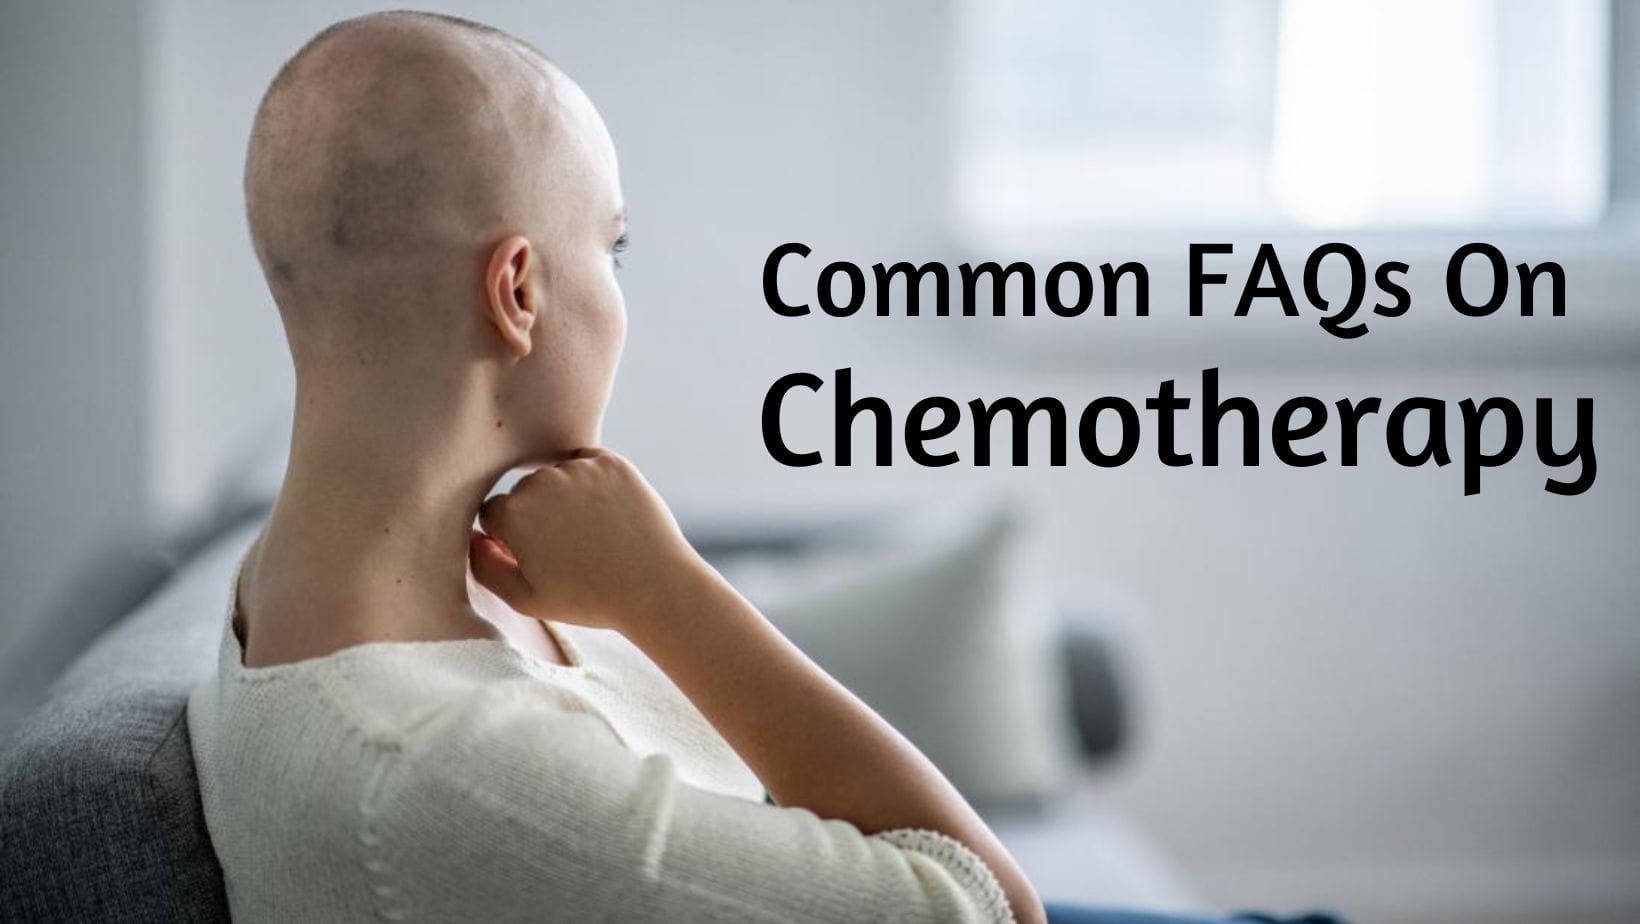 Cancer Treatment: Can I Have Chemotherapy During Pregnancy? Experts Debunks Common Questions